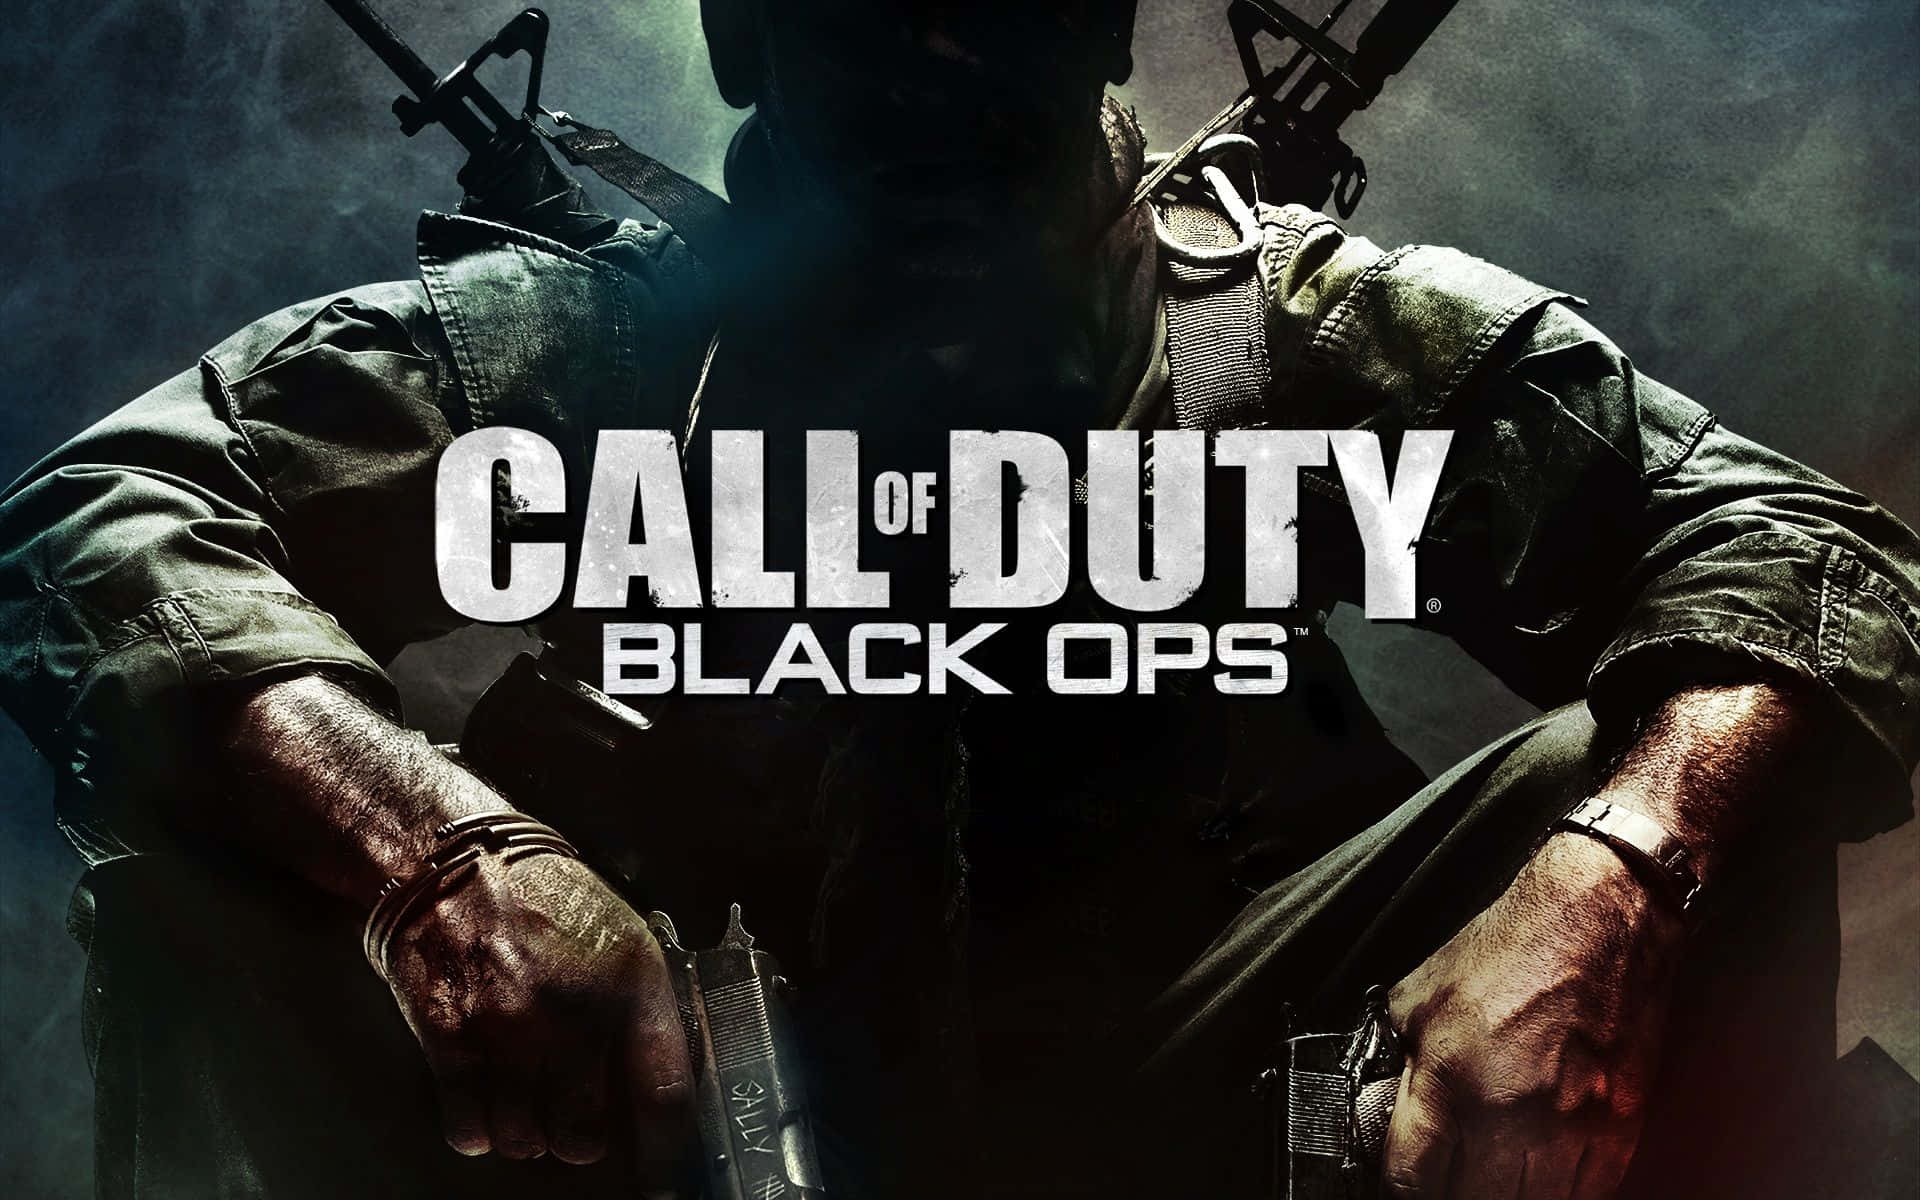 Prepare for intense, tactical combat in Call of Duty: Black Ops Wallpaper